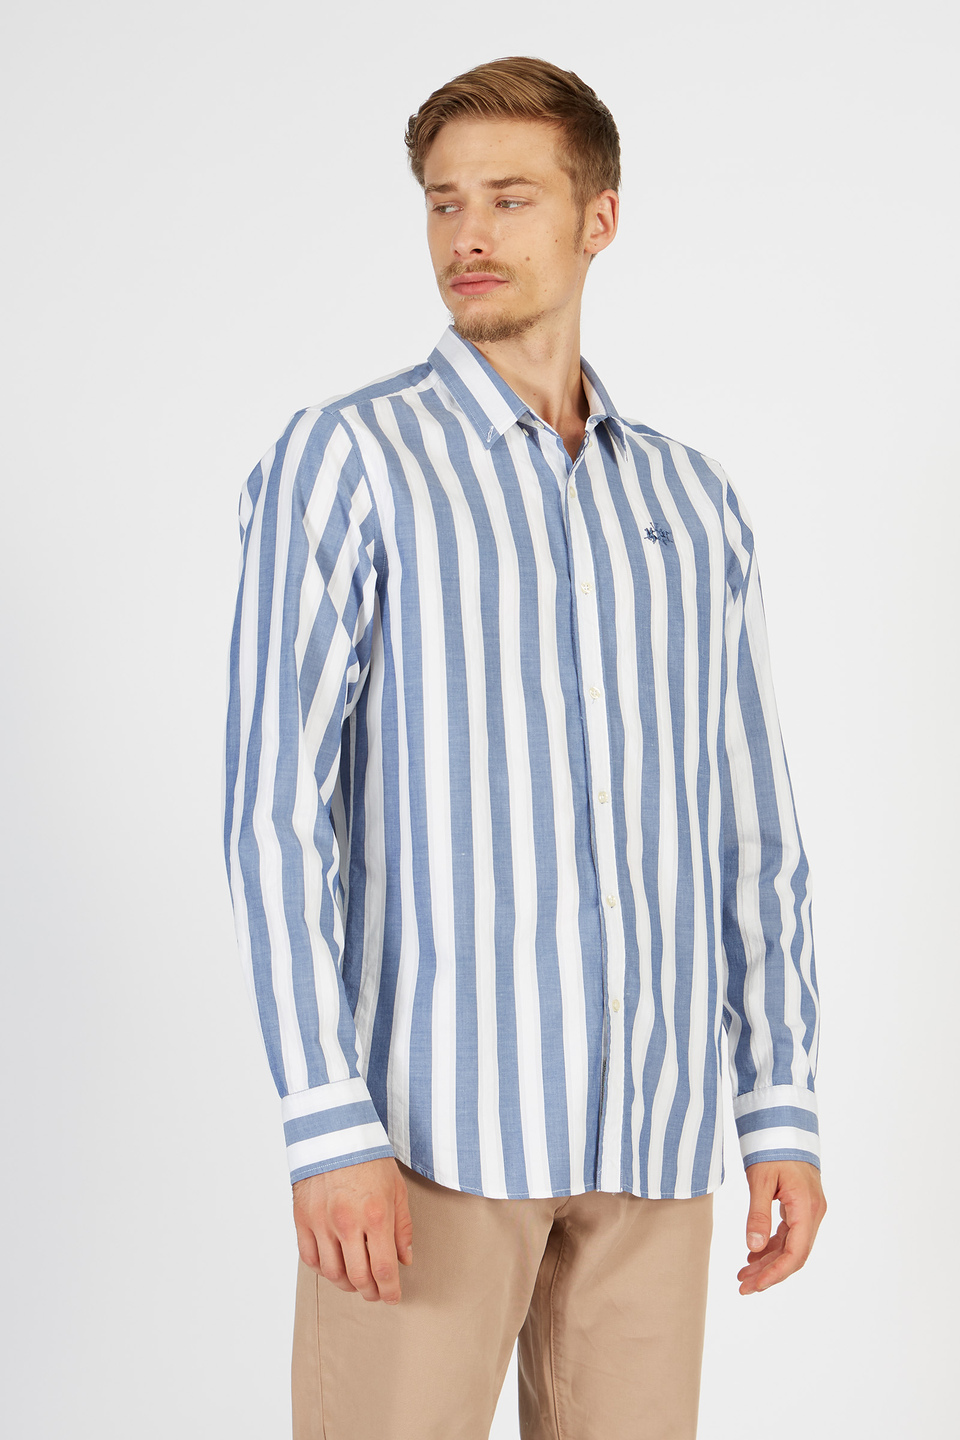 Men’s Essential Shirt with Striped Long Sleeves in Regular Fit Cotton | La Martina - Official Online Shop